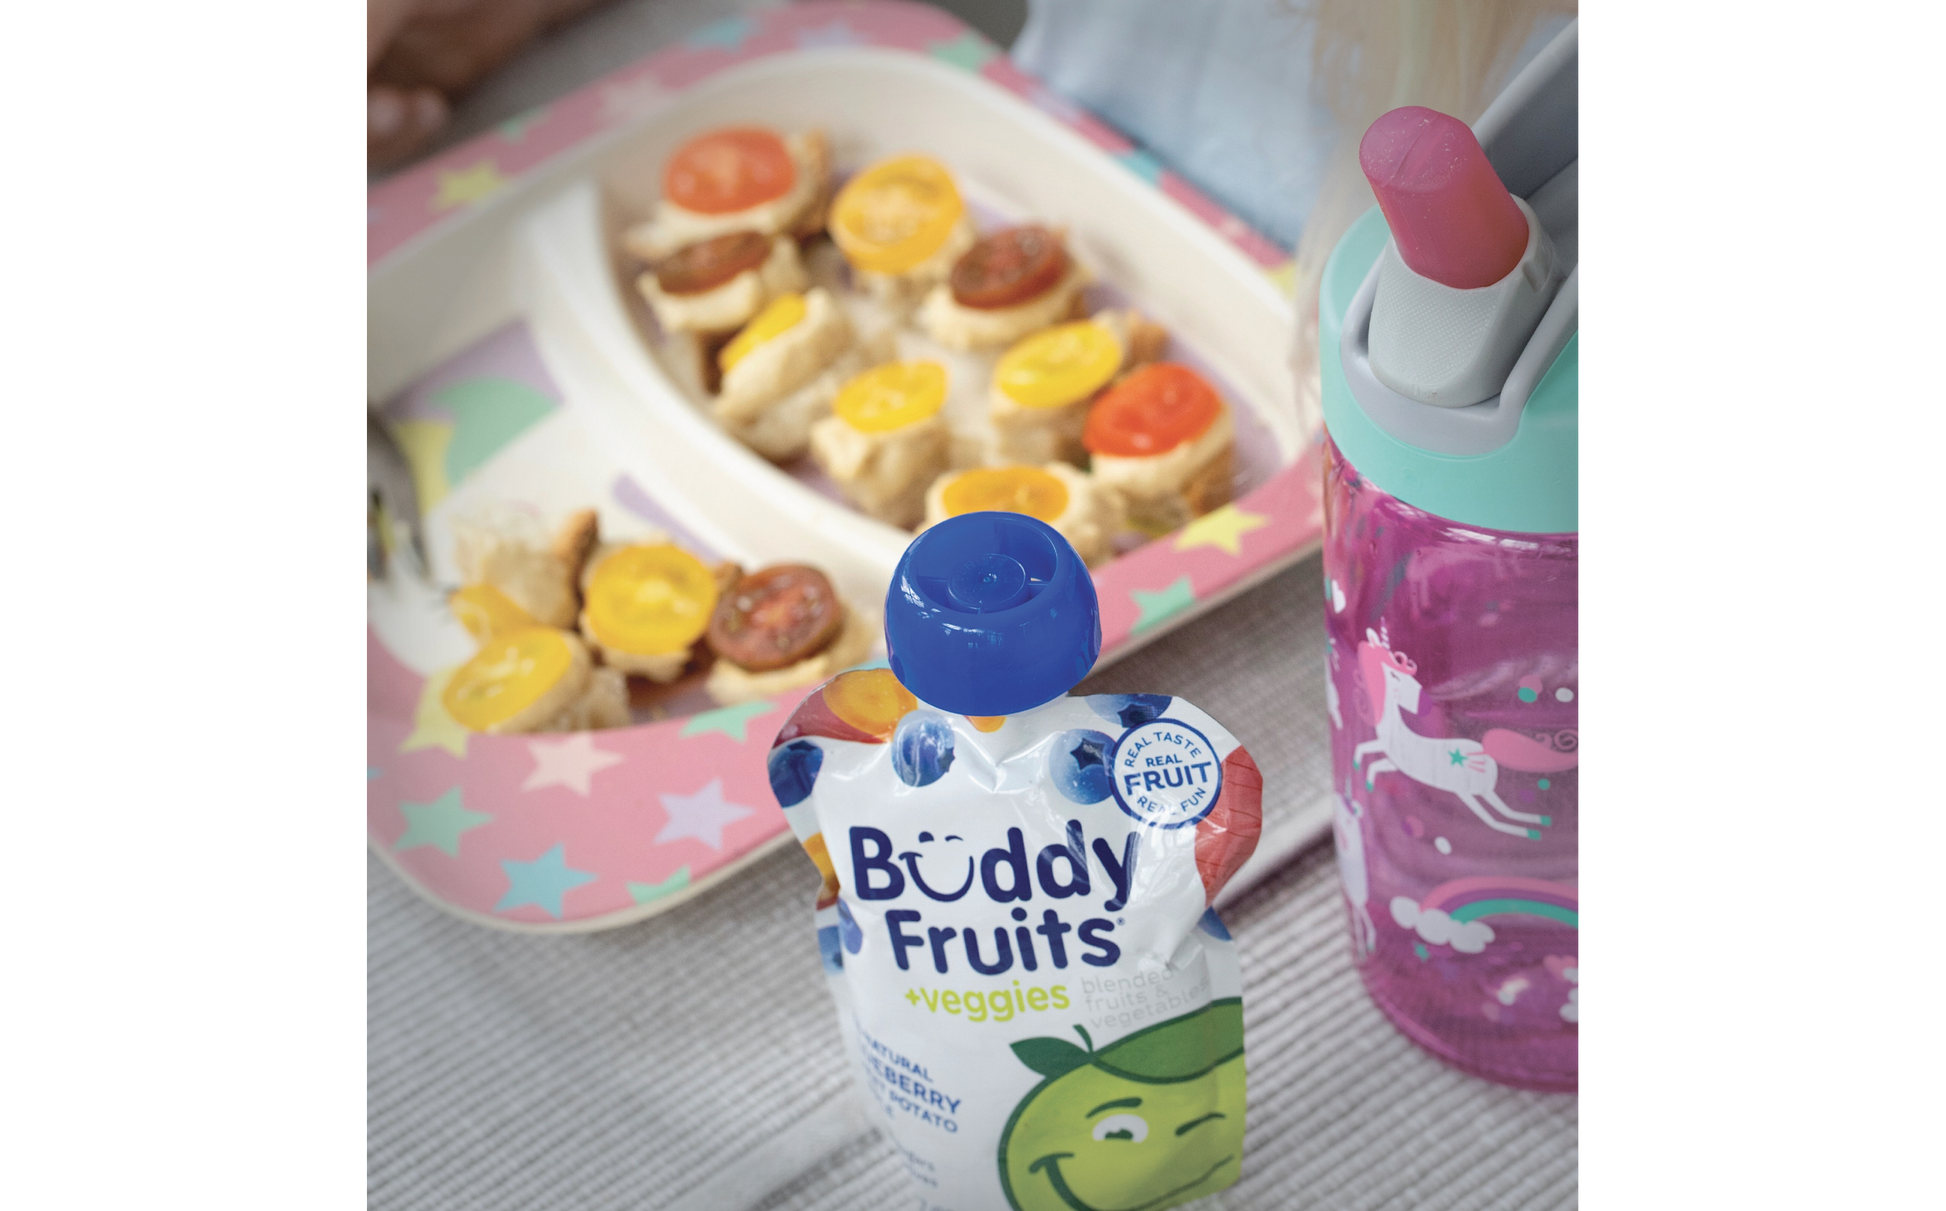 Buddy Fruits Blueberry, Sweet Potato, & Apple fruit & veggies pouch paired perfectly with a nutritious and balanced meal sure to make any kid happy.